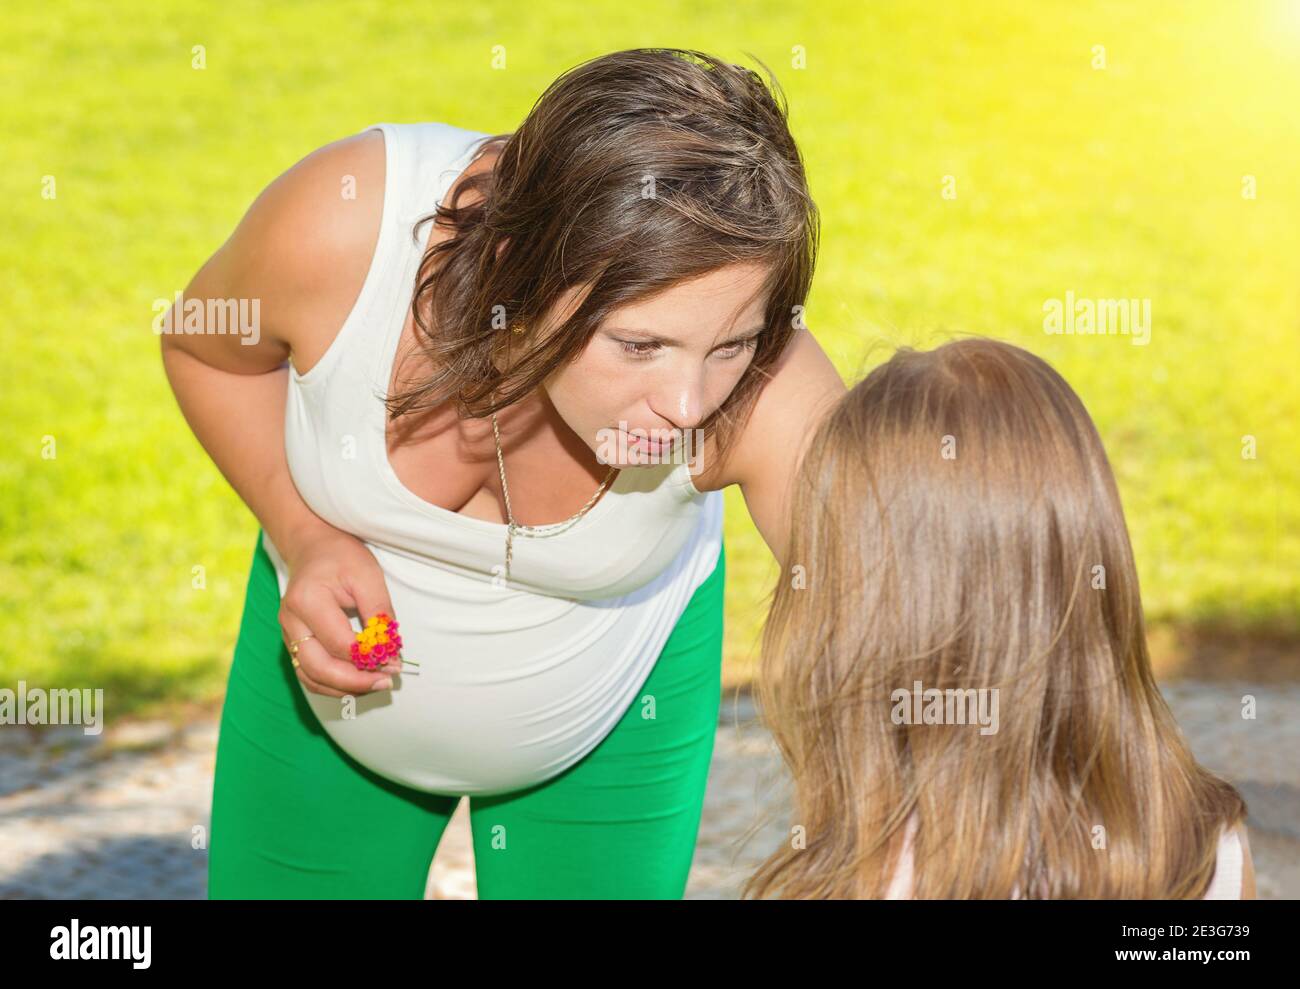 Pregnant woman explaining something to her daughter, girl who is jealous on her mother about the new pregnancy sitting outdoors on a green grass meado Stock Photo